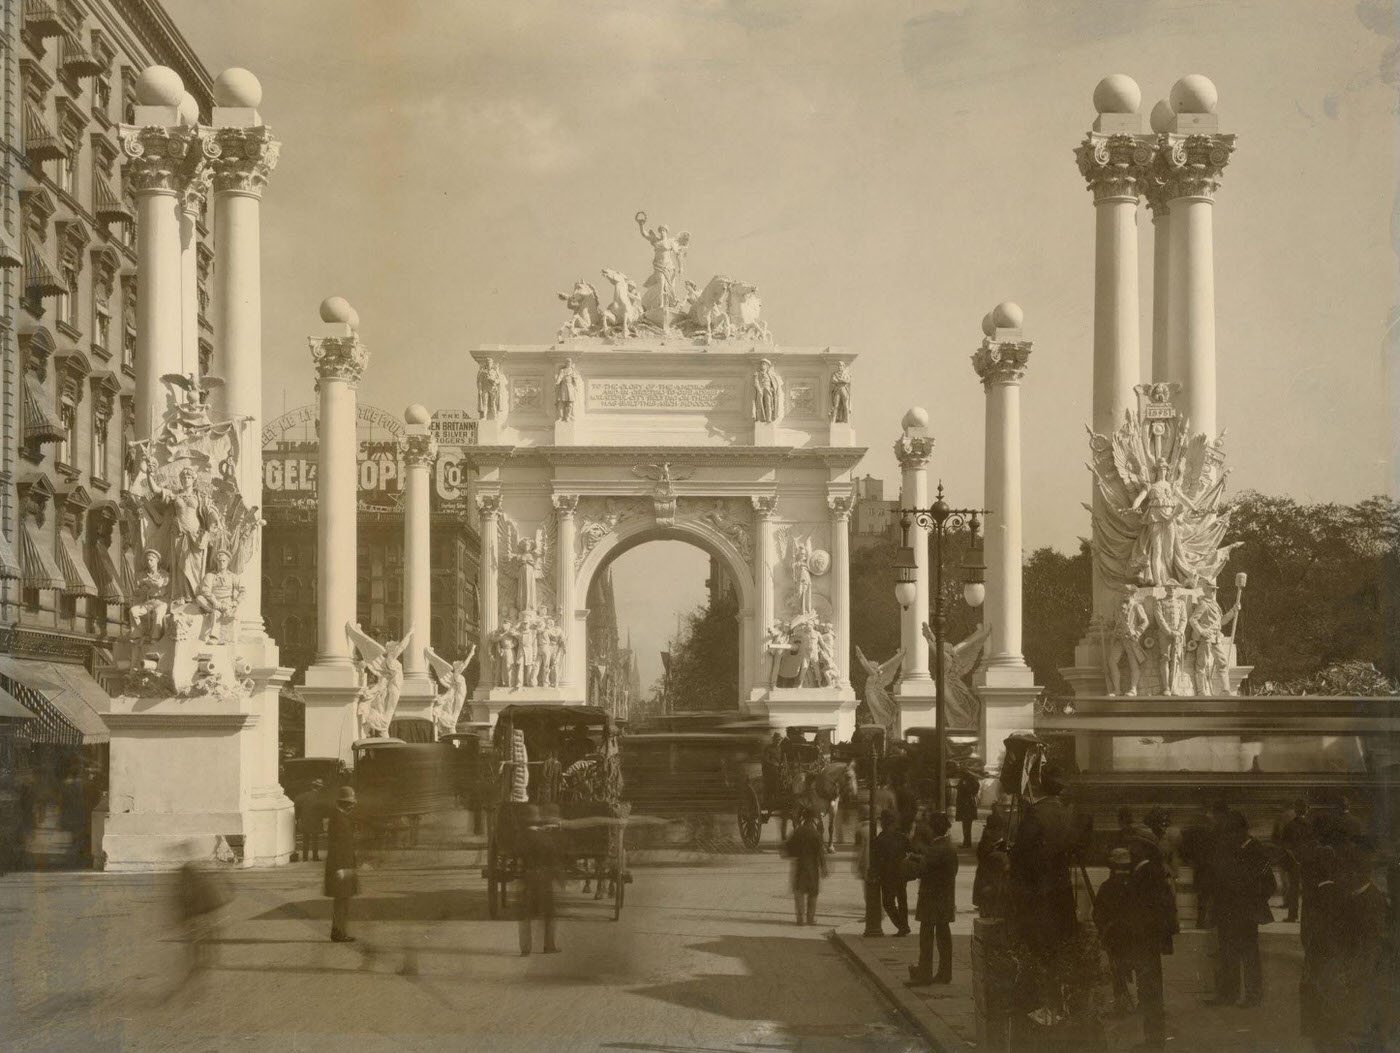 The Dewey Arch At Madison Square Flanked By A Colonnade, People Walking In The Center, New York City, 1899